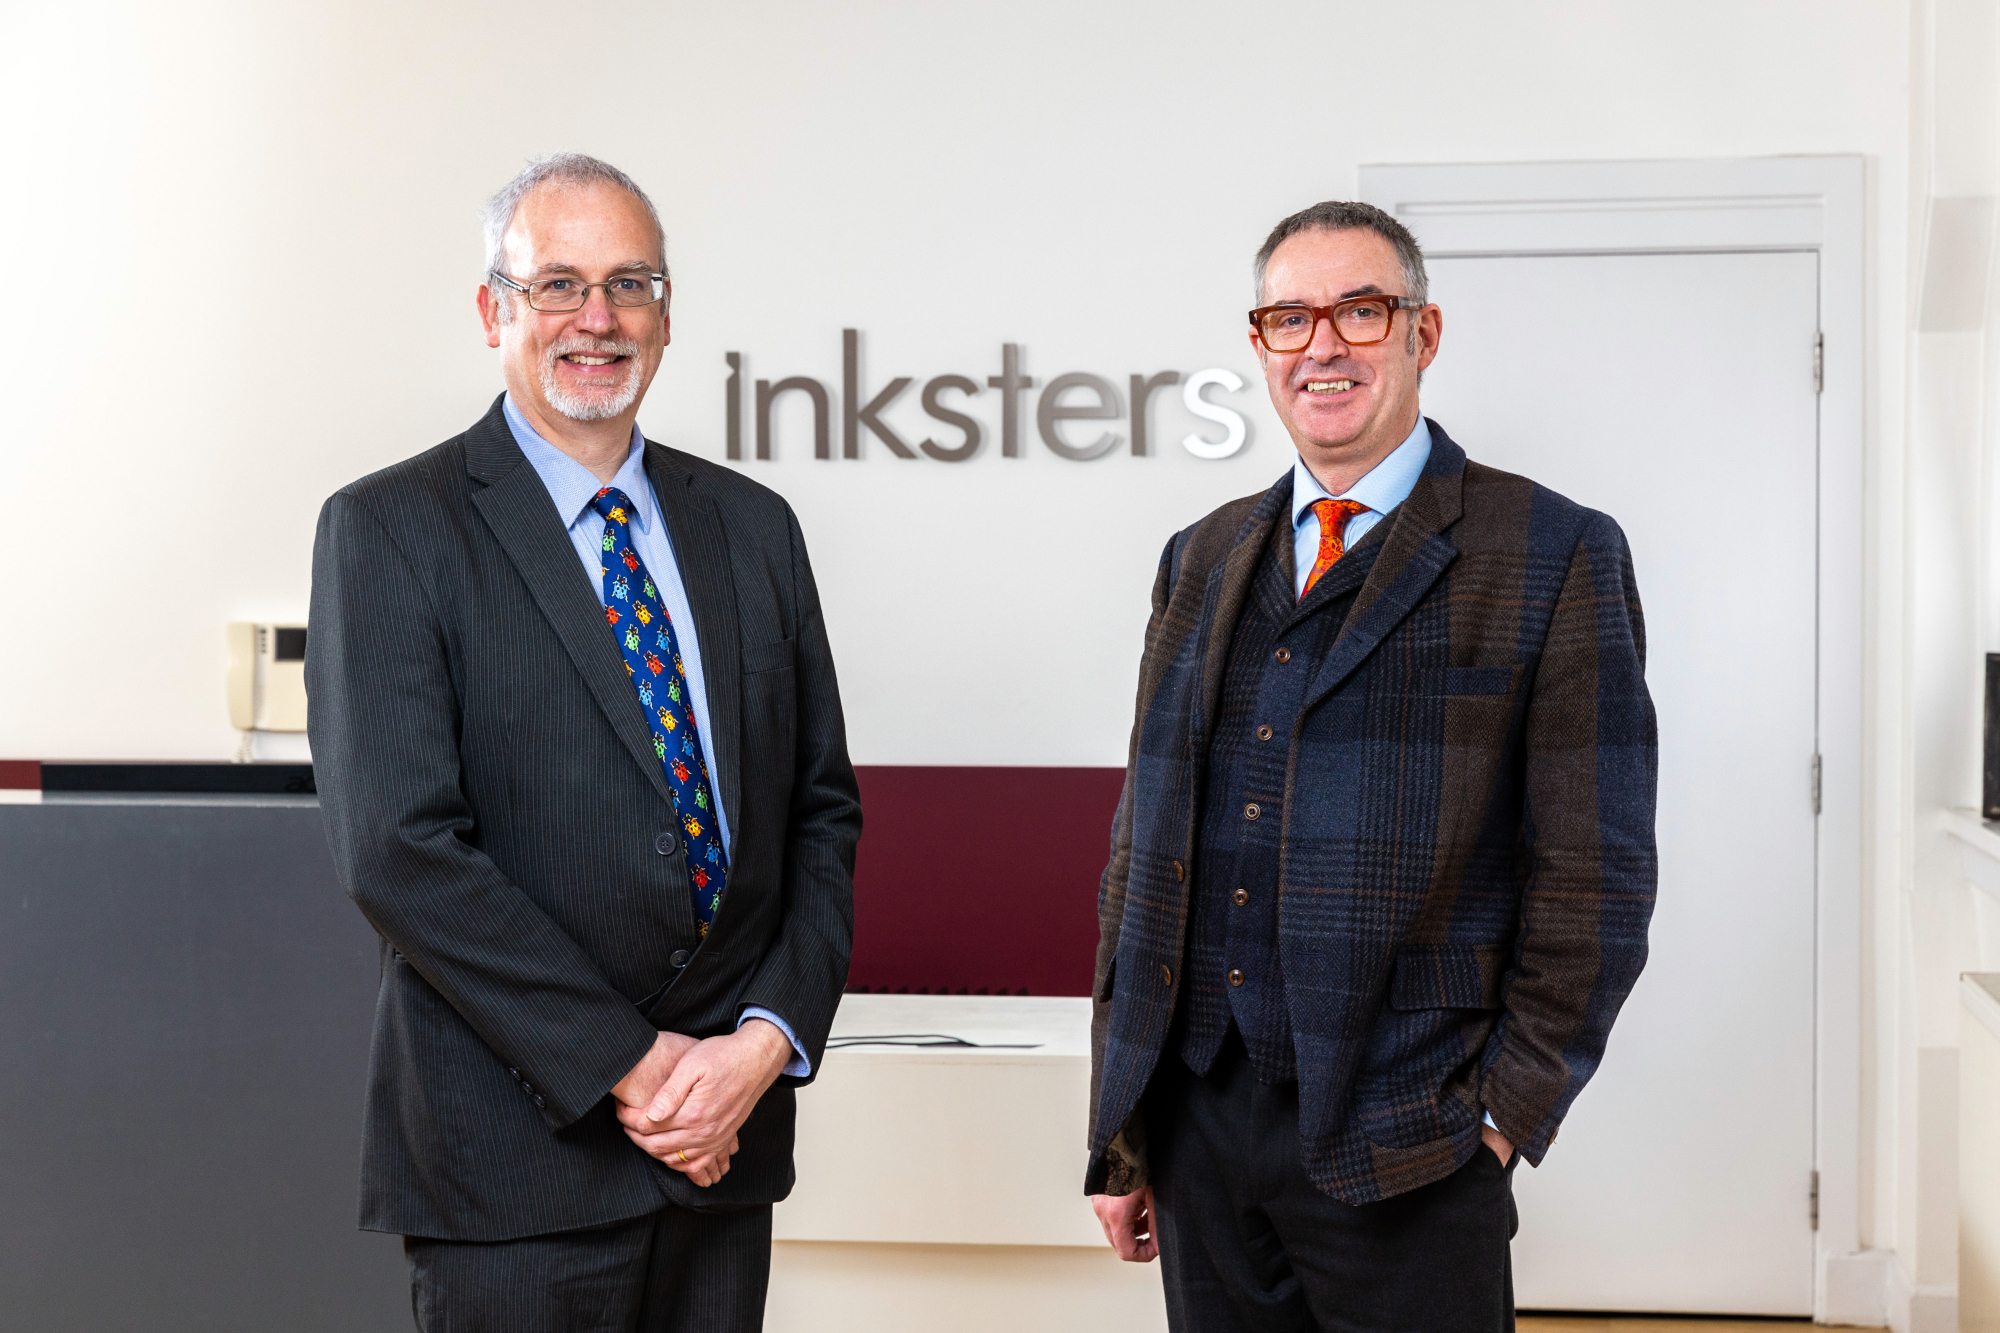 Martin Burns joins Inksters